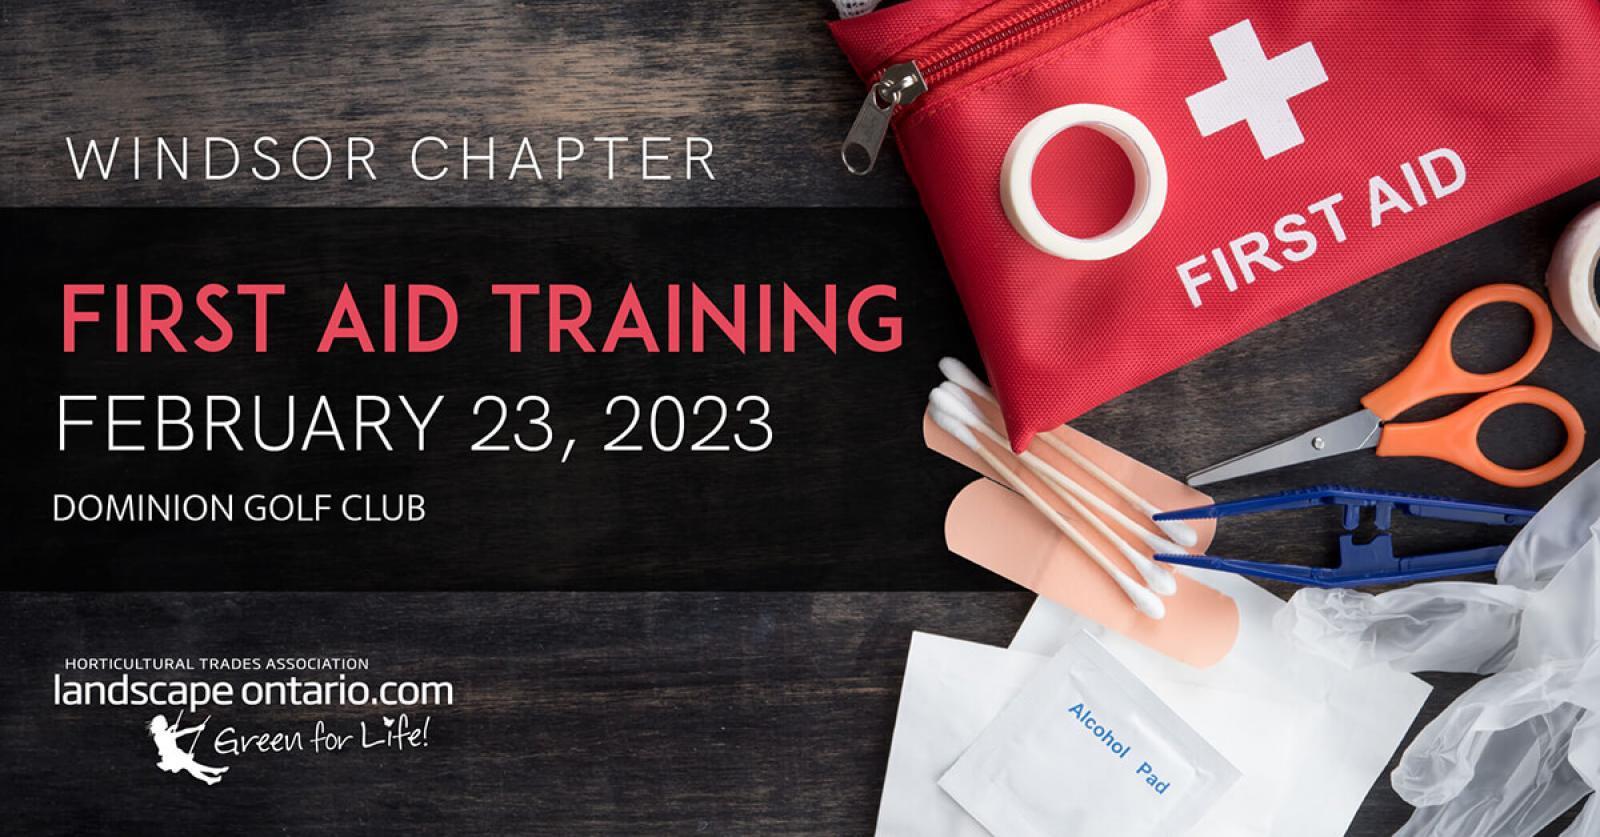 Windsor Chapter First Aid Training February 23, 2023